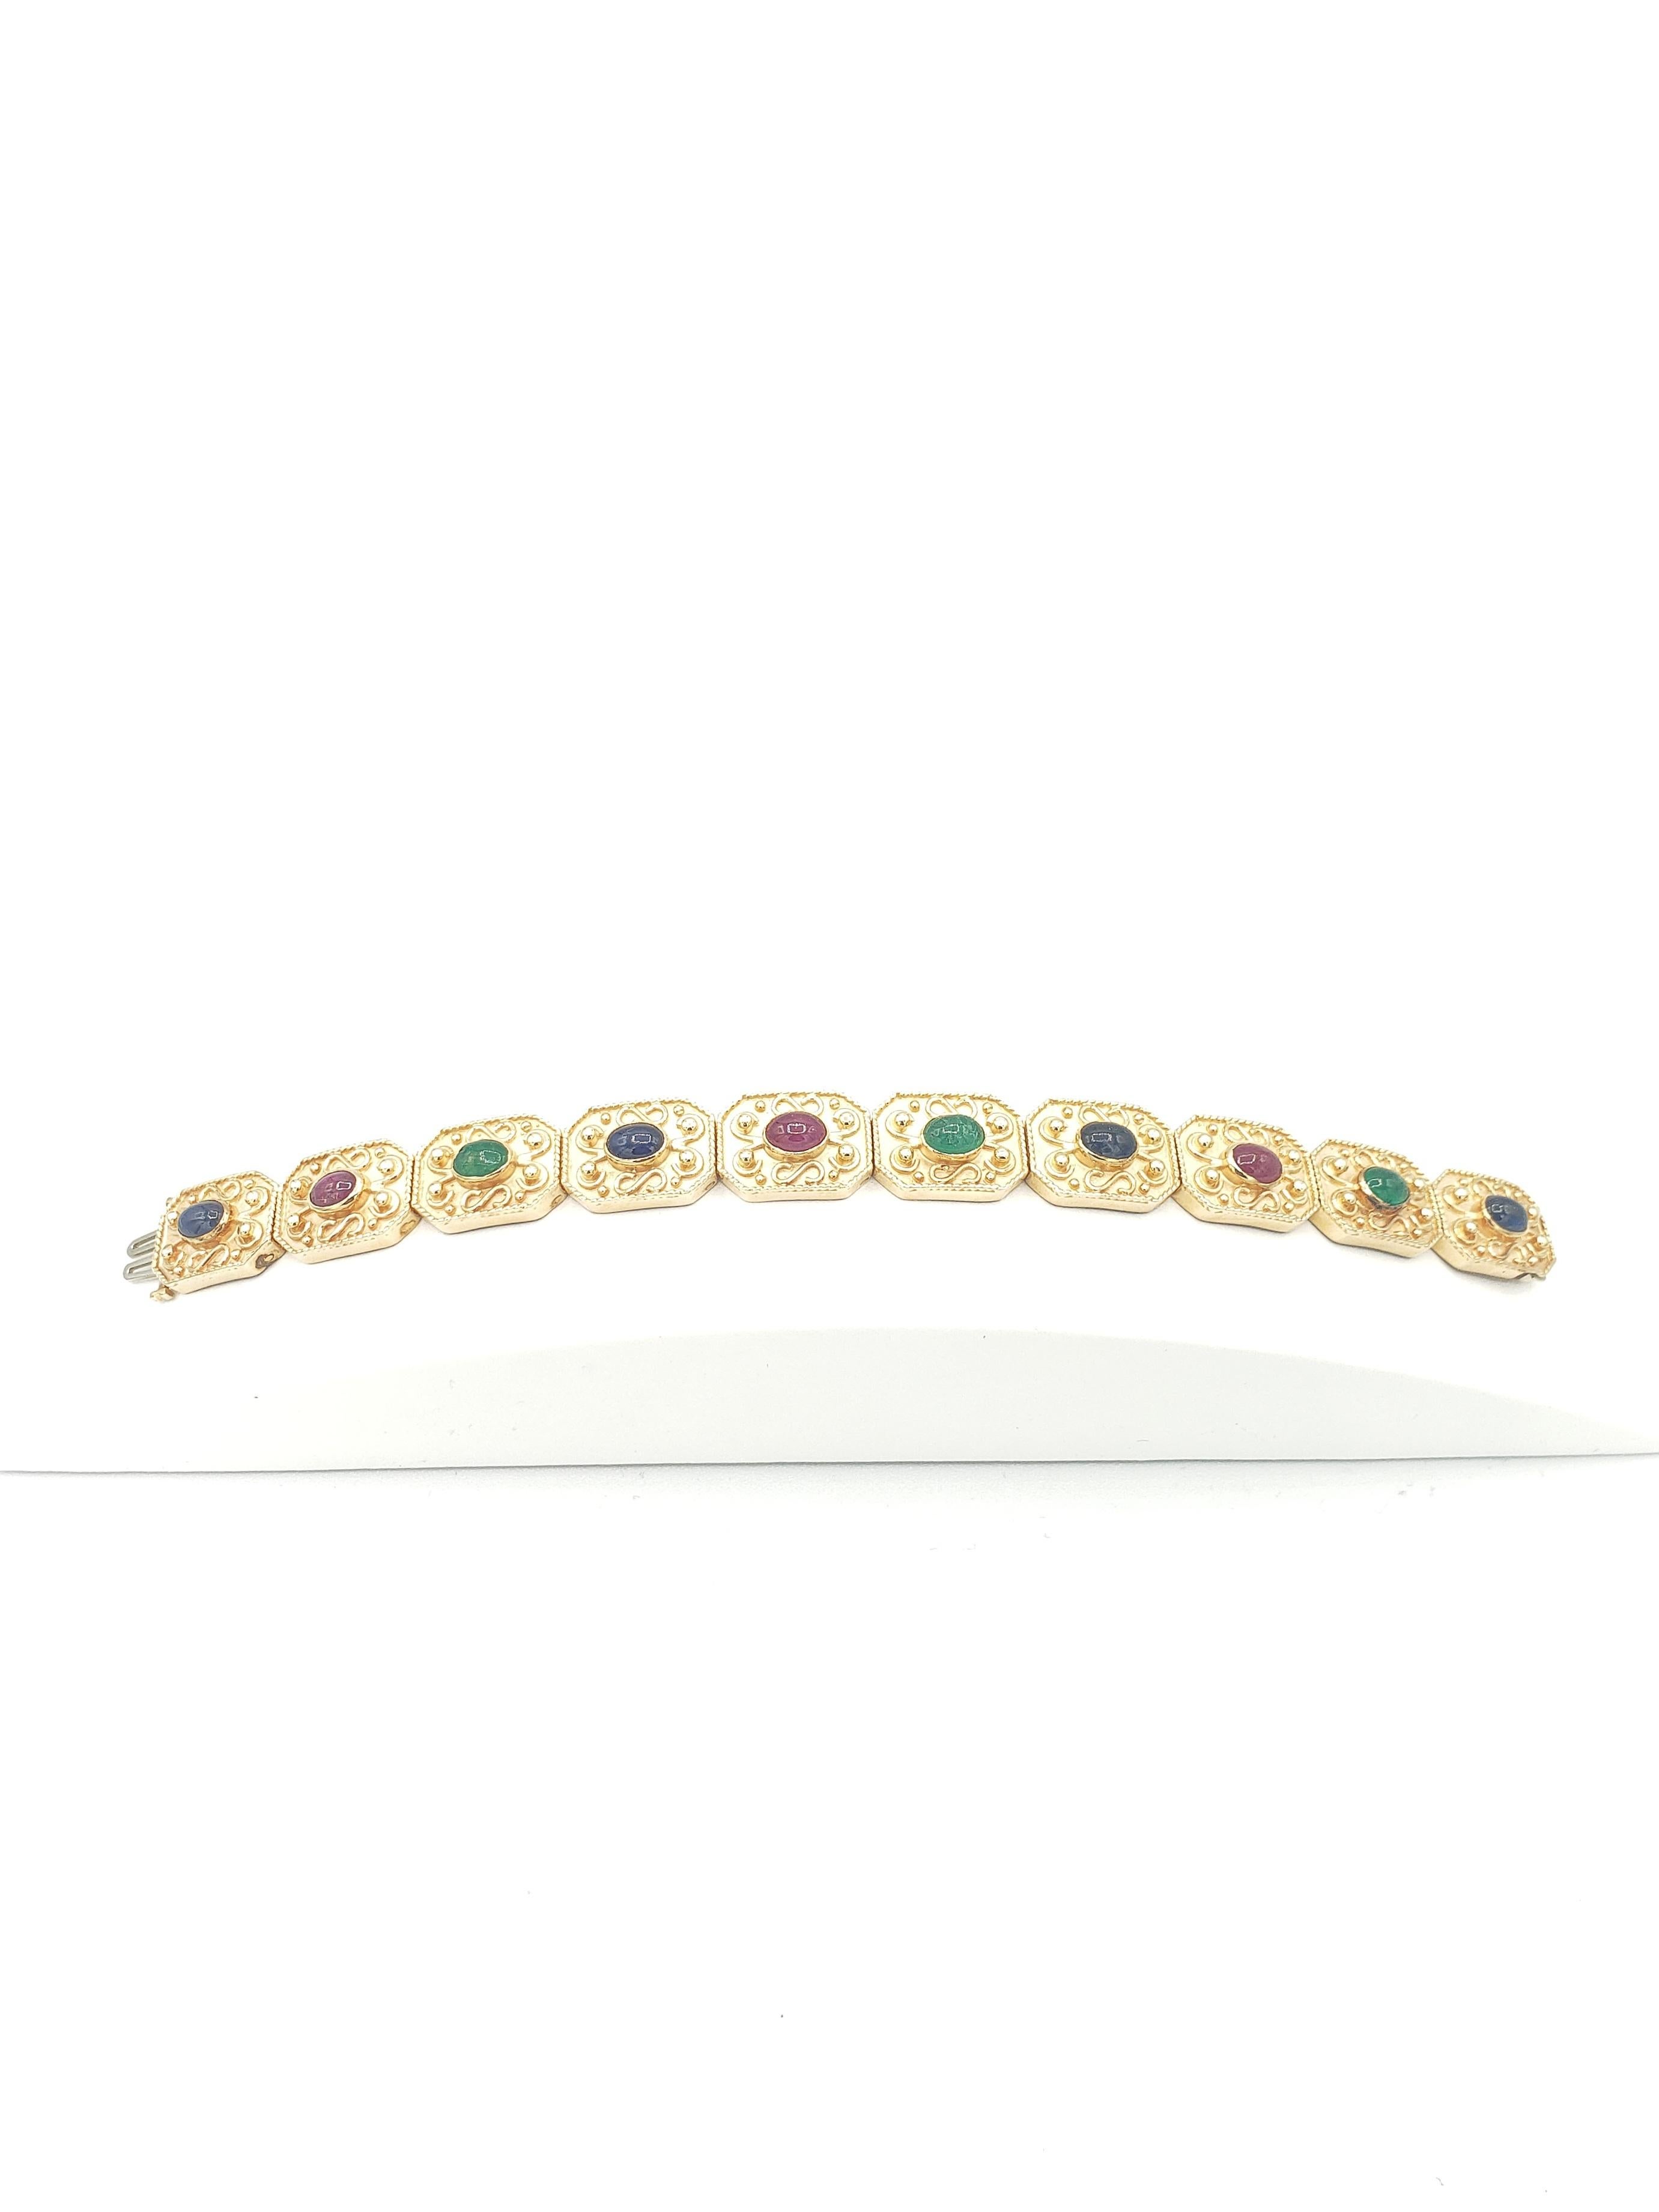 This beautiful bracelet from LaFrancee is a stunning piece of jewelry that features natural ruby, sapphire, and emerald gemstones in a 14k solid yellow gold setting. The Byzantine style adds a touch of elegance and sophistication, making it perfect